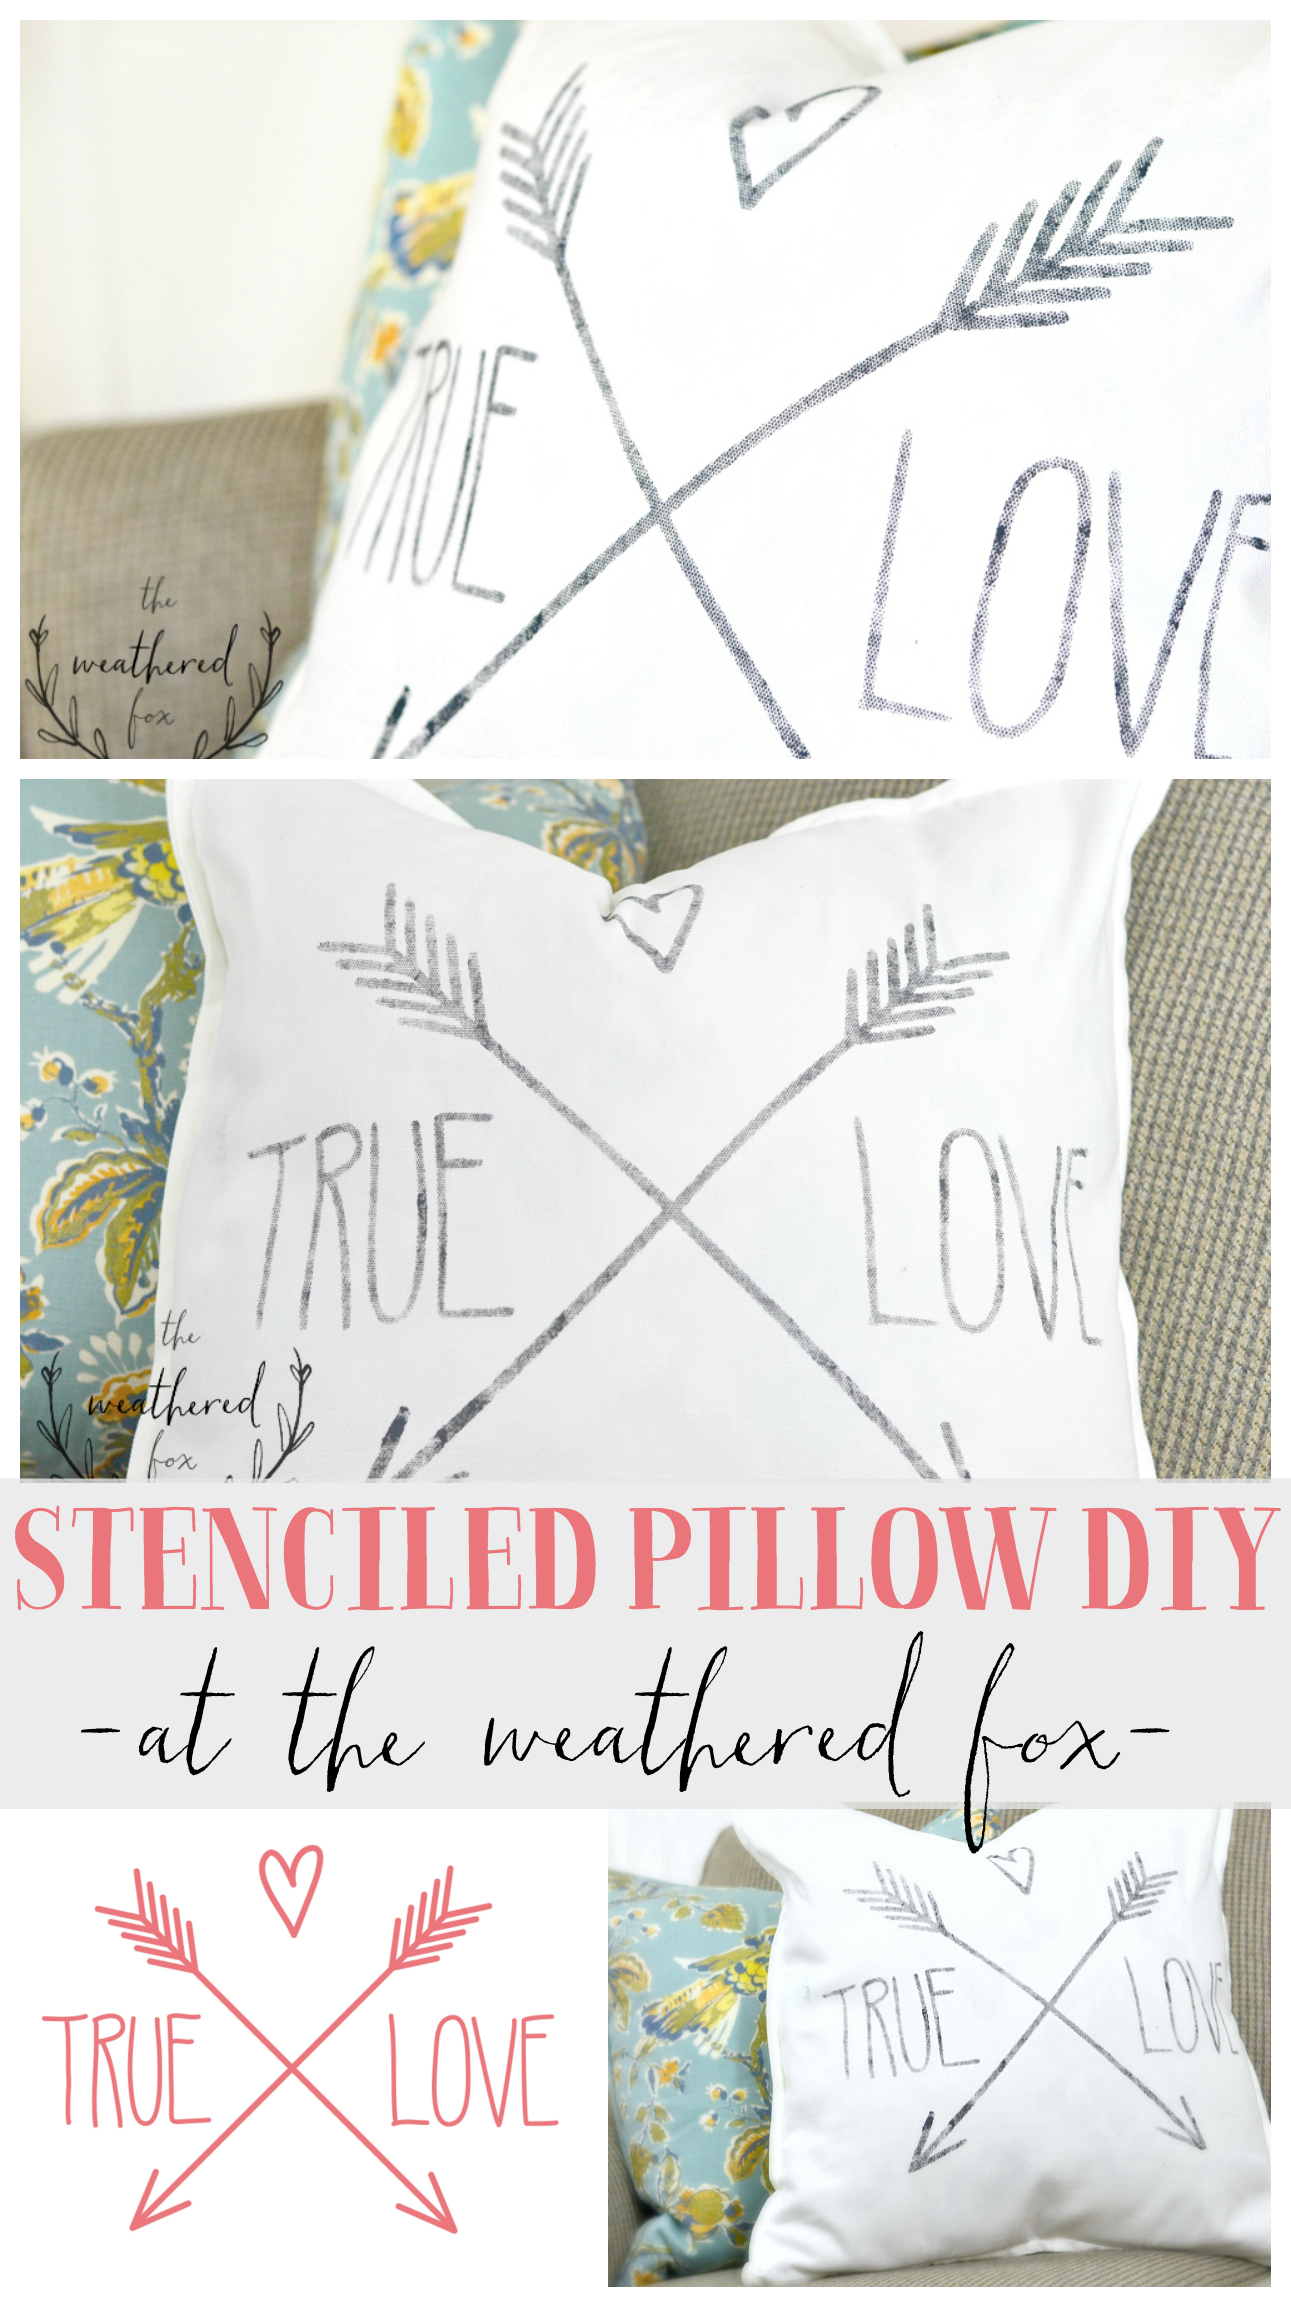 Stencil Pillow DIY Tutorial. This is such a quick 20 minute project that makes a huge home decor statement! I'm getting a Cricut after seeing this! Great Valentines Day Gift! 